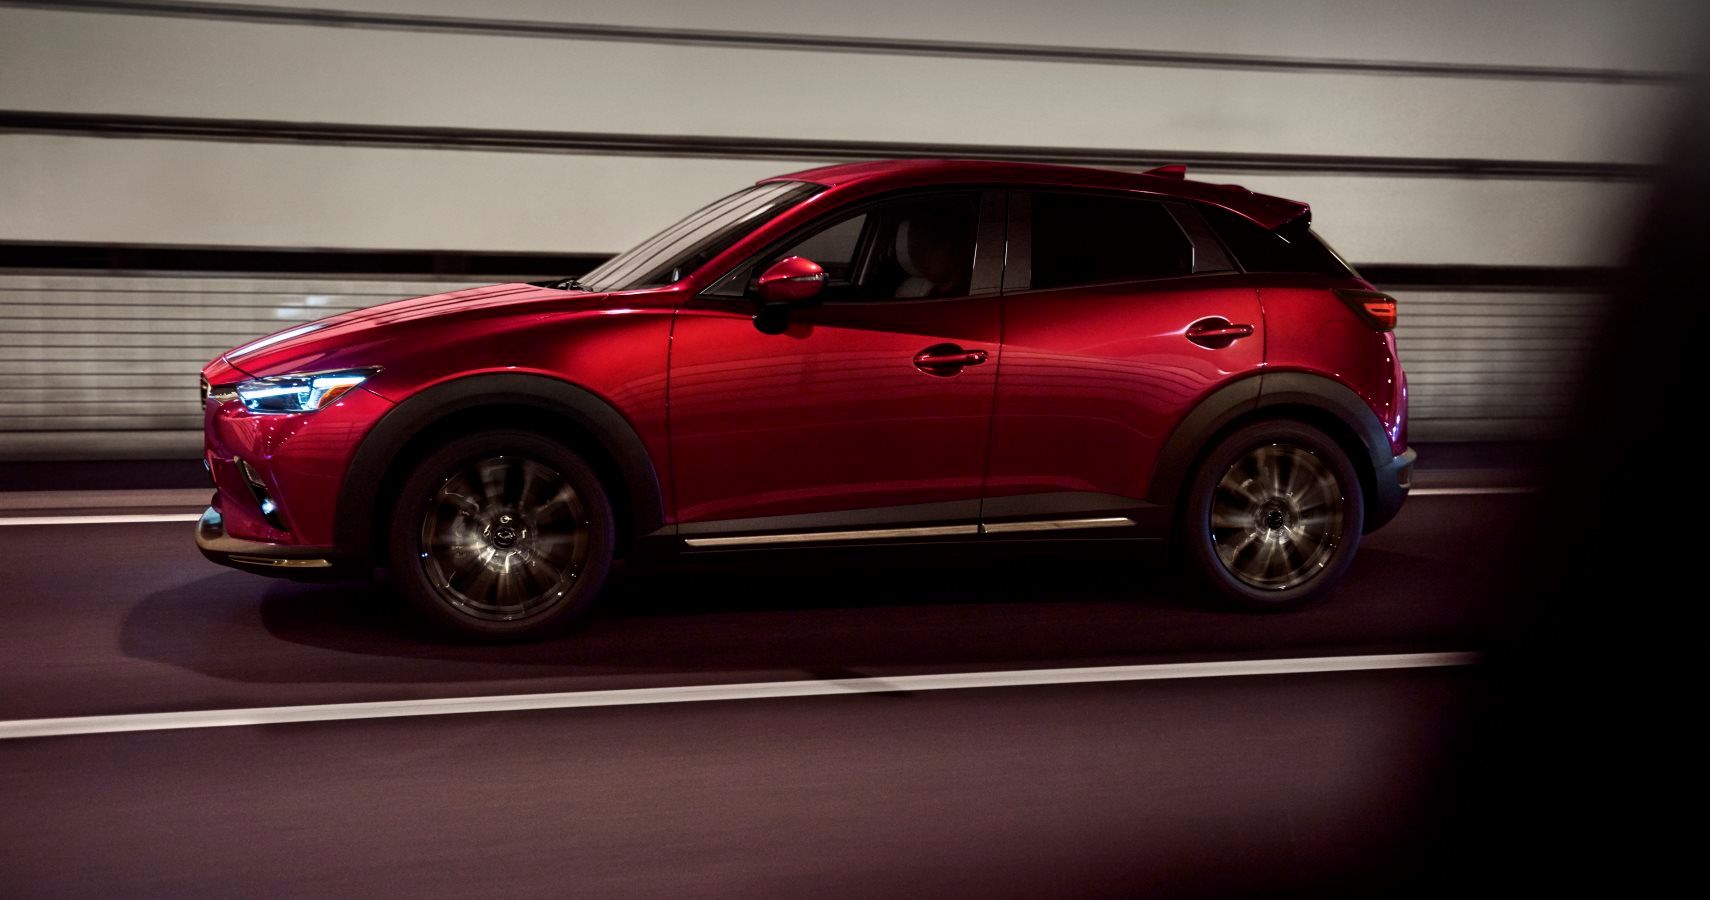 2019 Mazda CX-3 Crossover Gets More Power